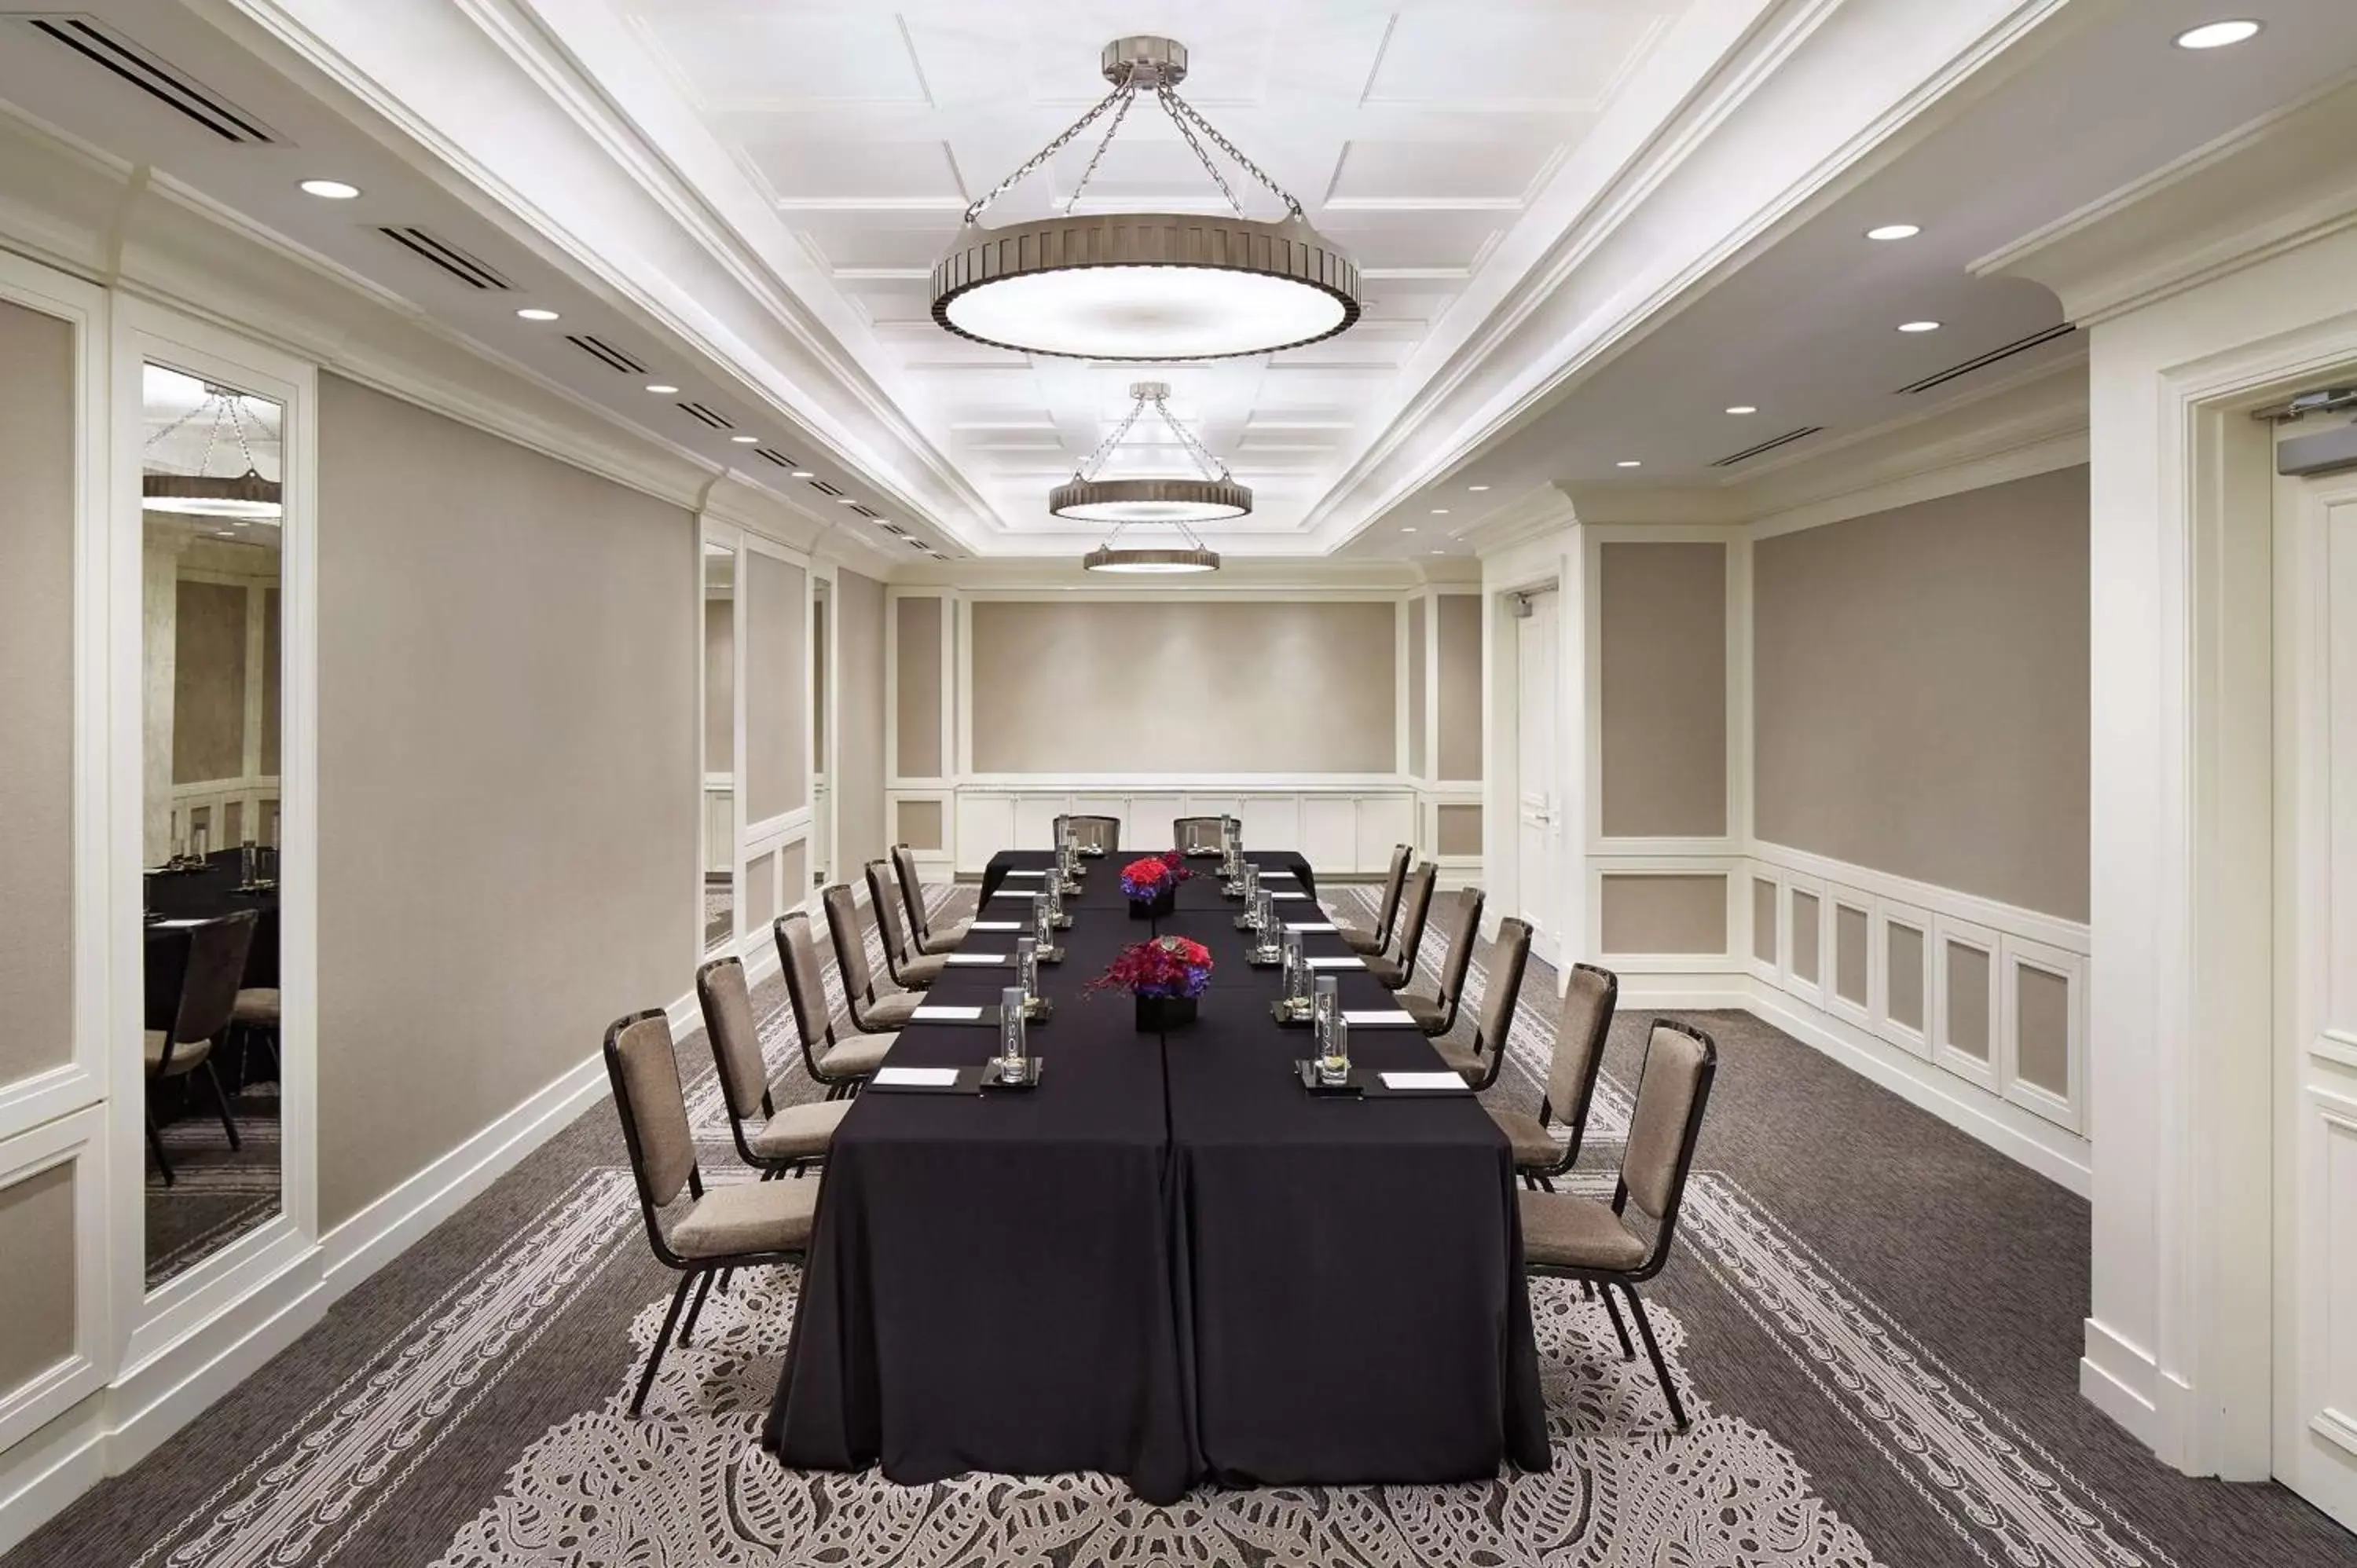 Meeting/conference room in Waldorf Astoria Chicago